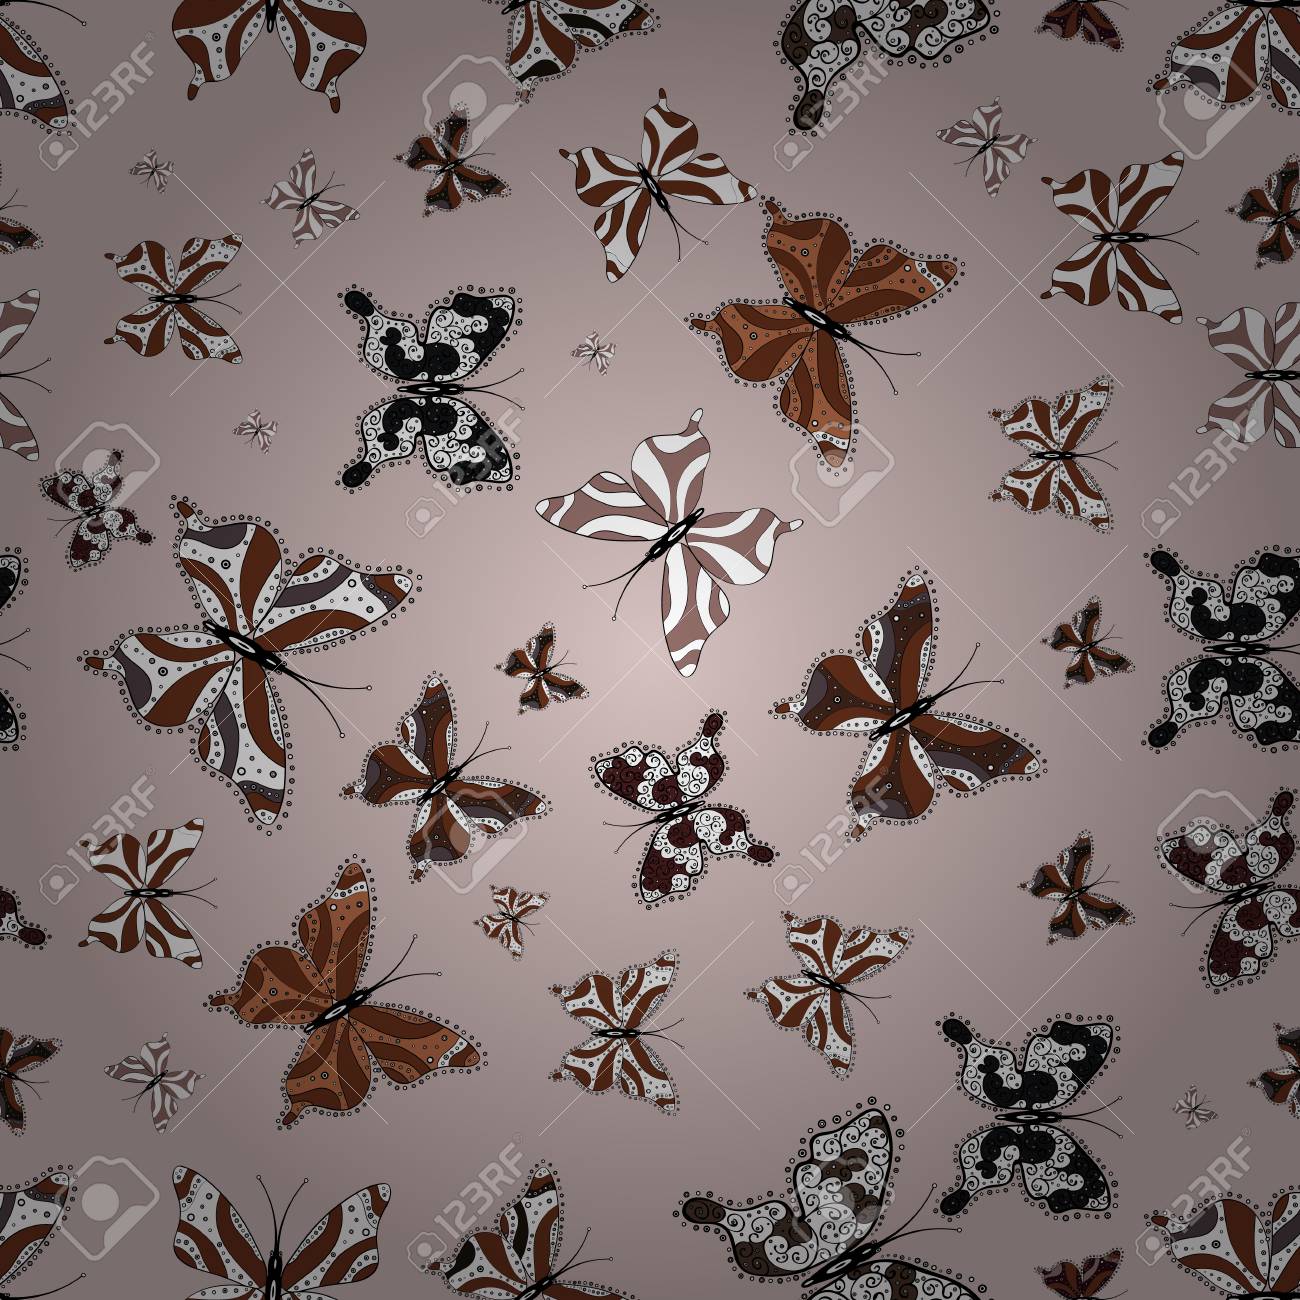 Repeating Insect Fabric Artwork For Wallpaper Spring Butterfly